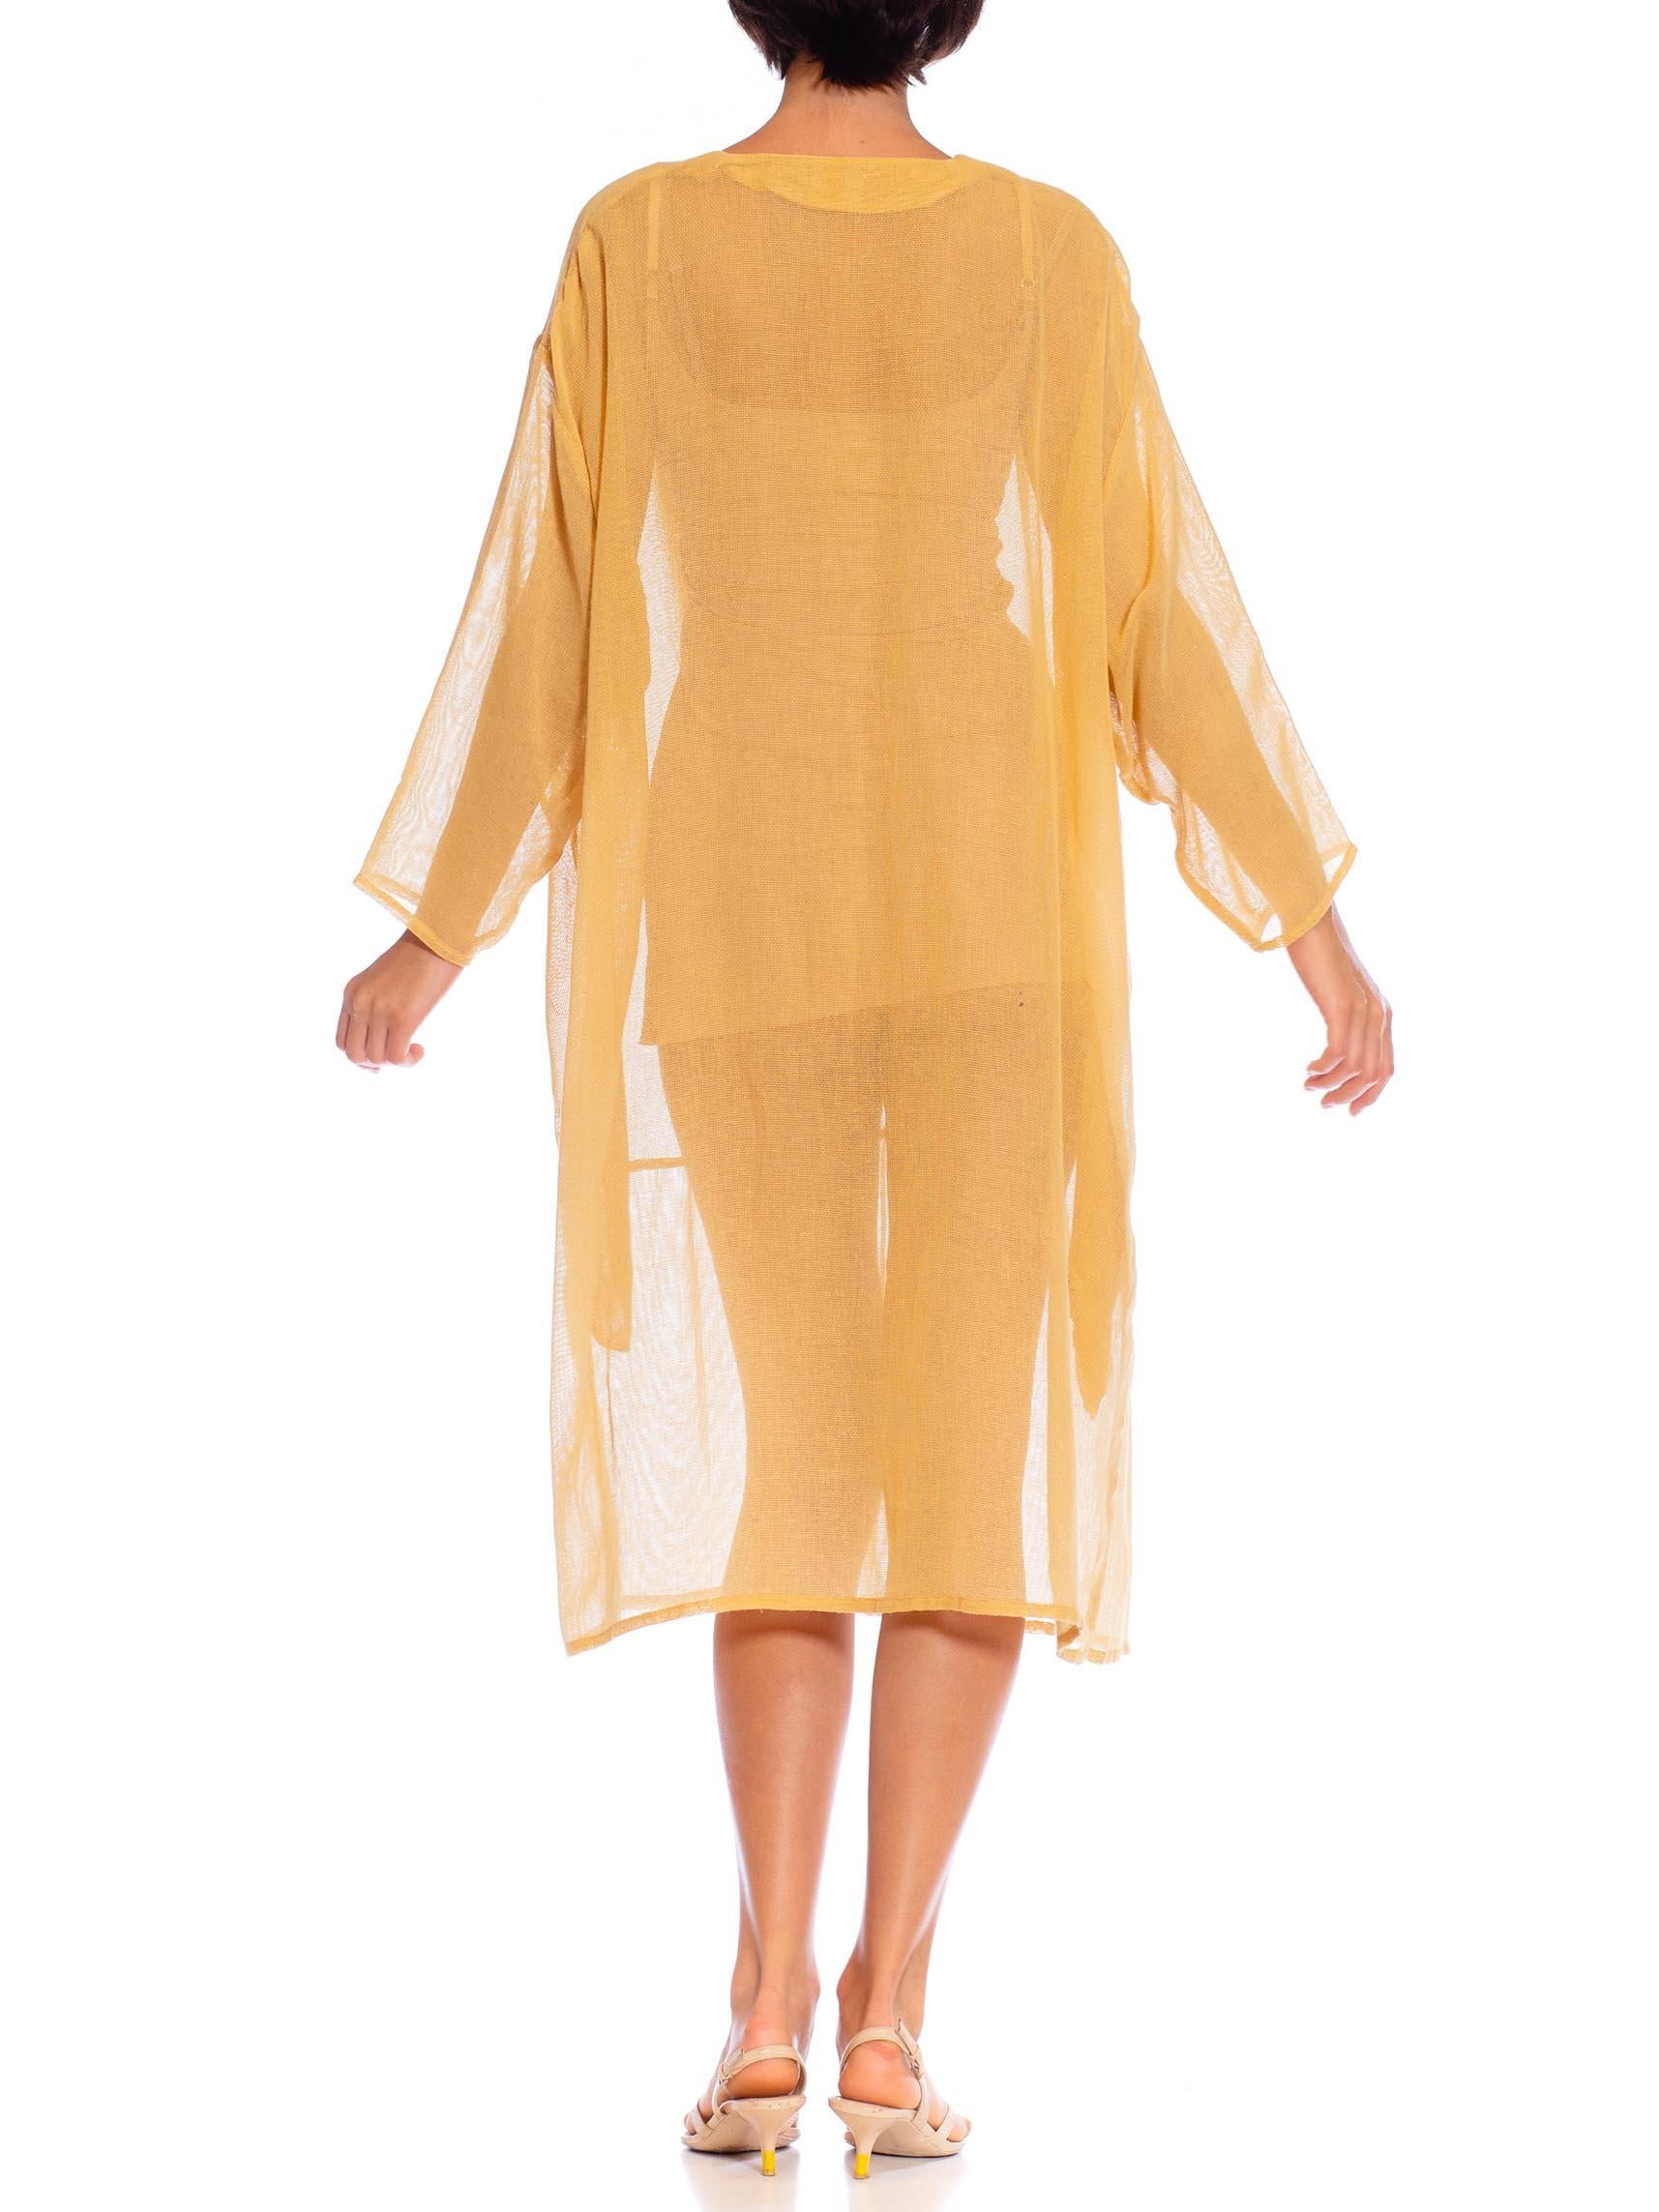 MORPHEW COLLECTION Mustard Yellow Cotton Blend Gauze Unisex Cowl-Neck Tunic Top For Sale 3